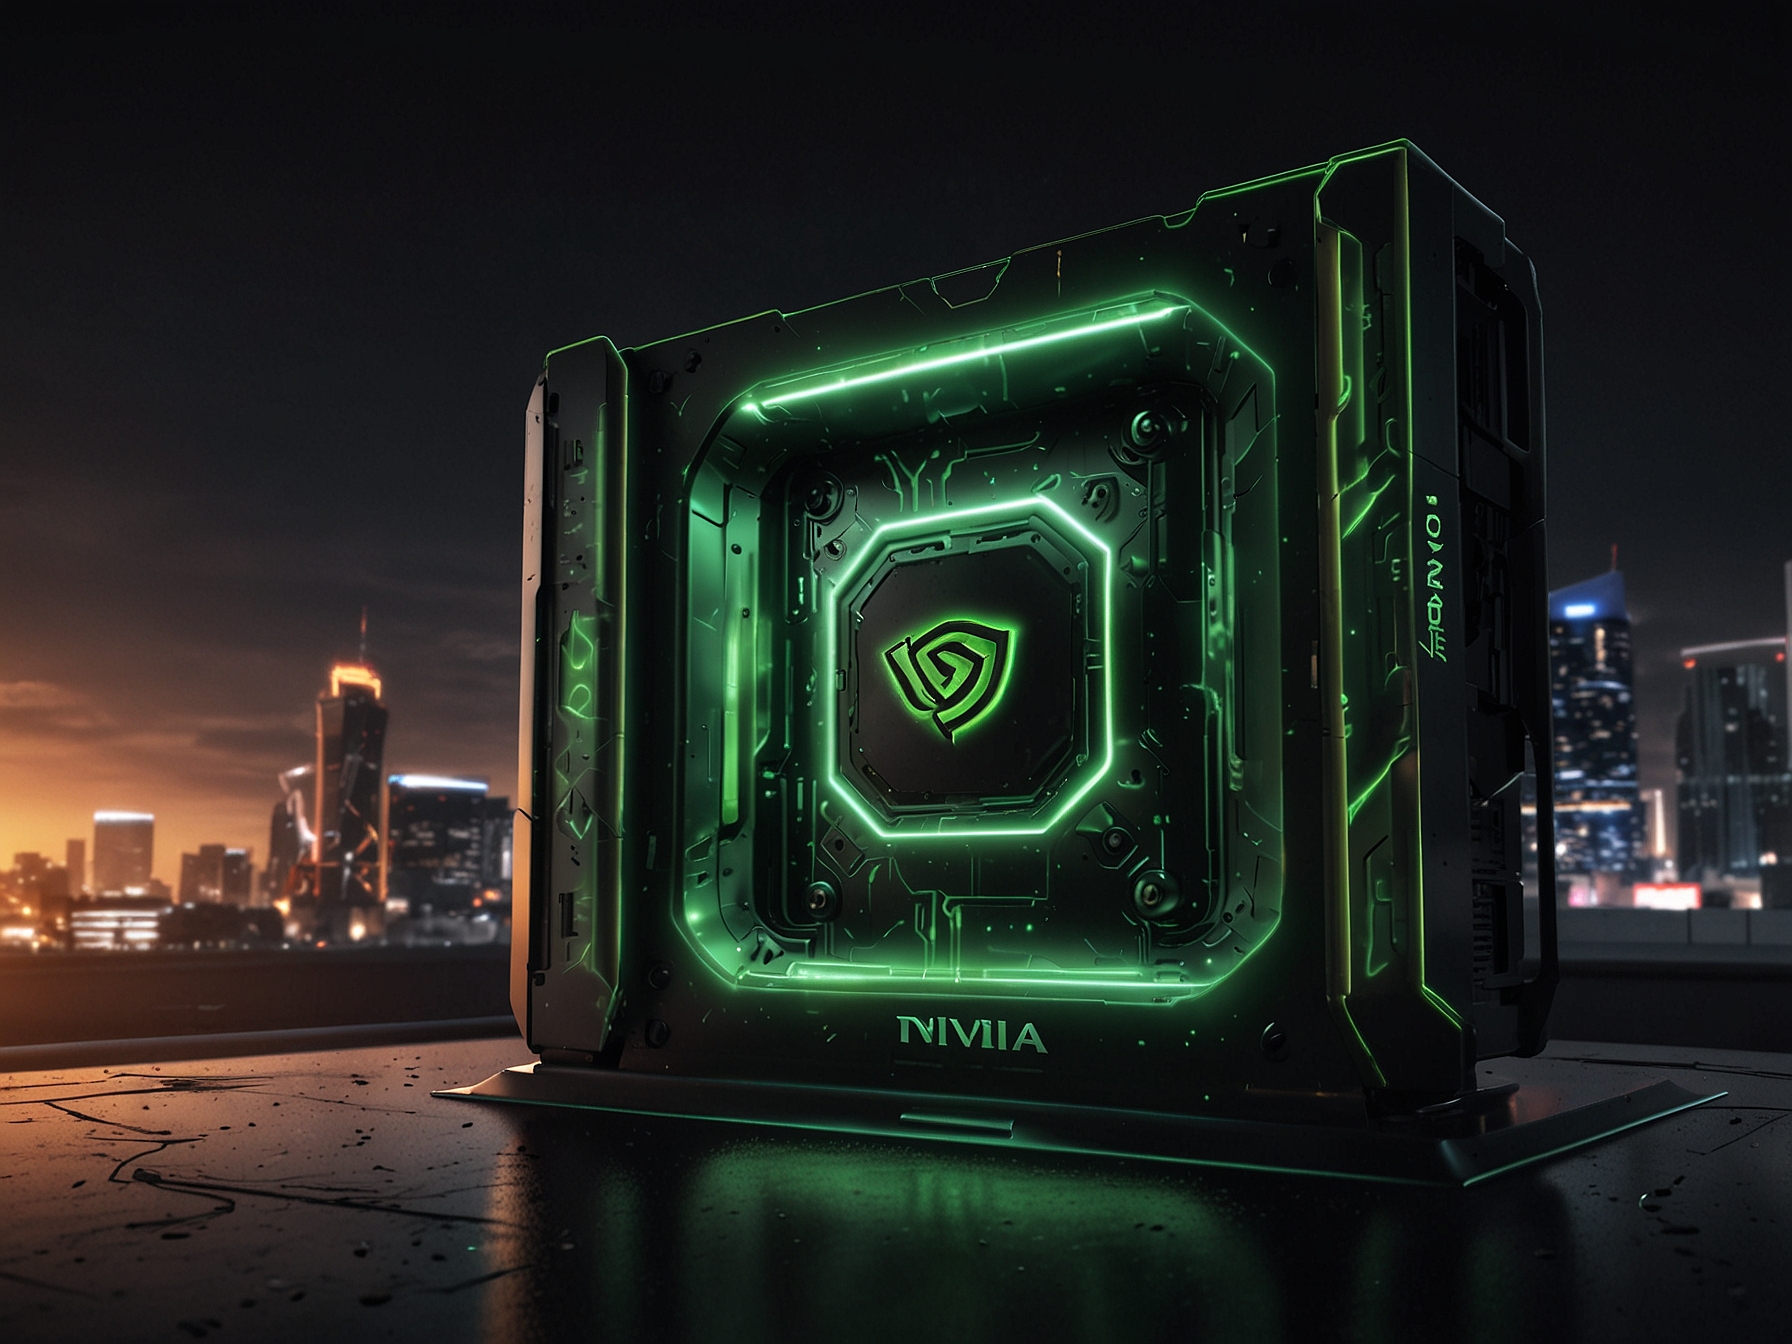 A visual representation of Nvidia's growth in GPU technology and AI sectors, showcasing its dominance in gaming and data centers, with futuristic elements like autonomous vehicles.